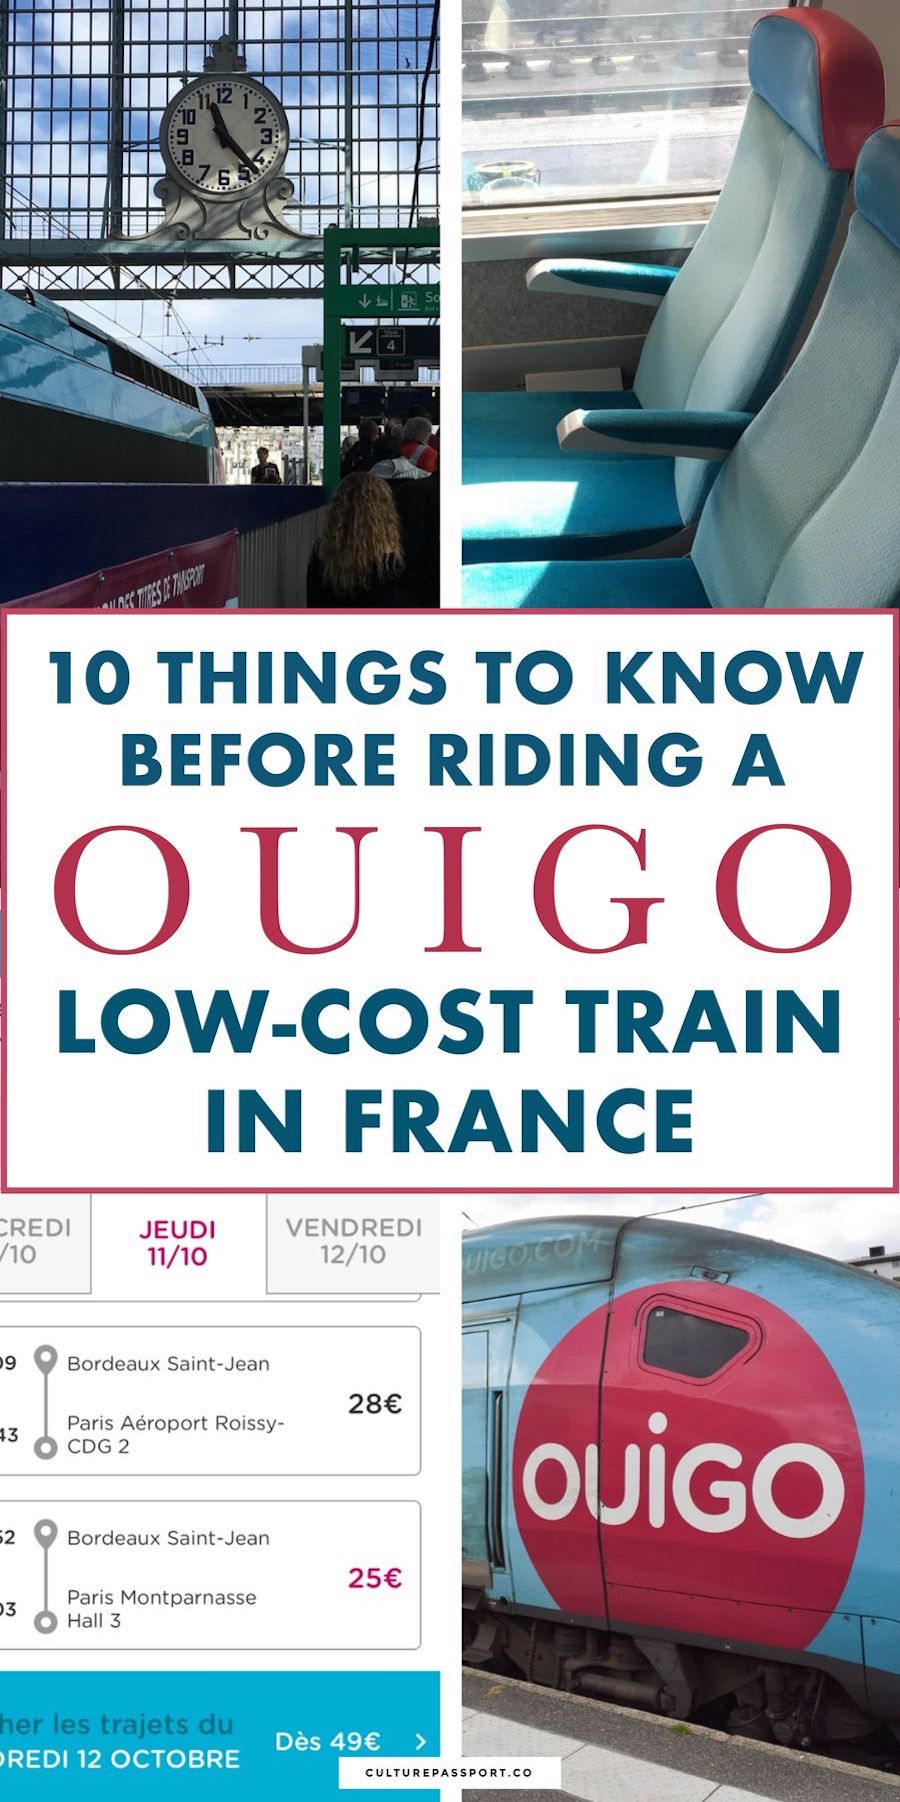 OuiGo Review: 10 Things To Know Before Riding This Low Cost Train In France